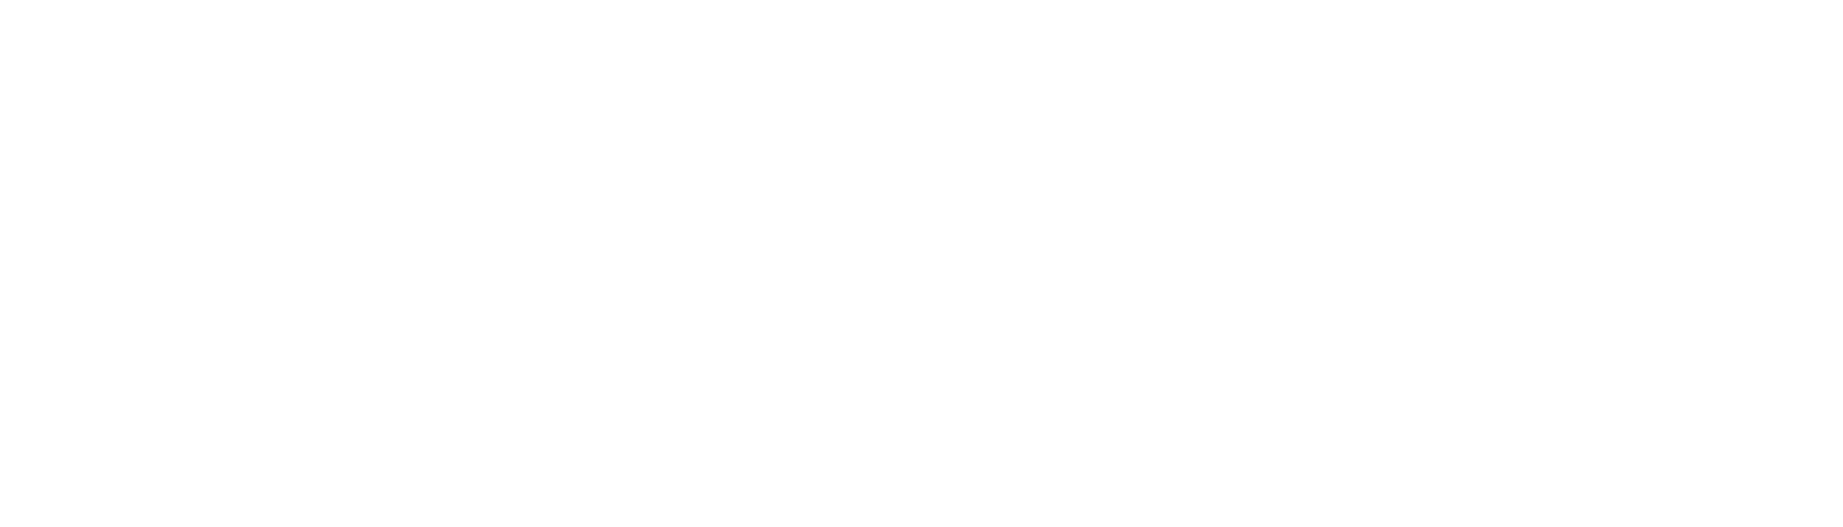 Making Japan better. The Realize Group is dedicated to the creation of a joyful, plentiful society.